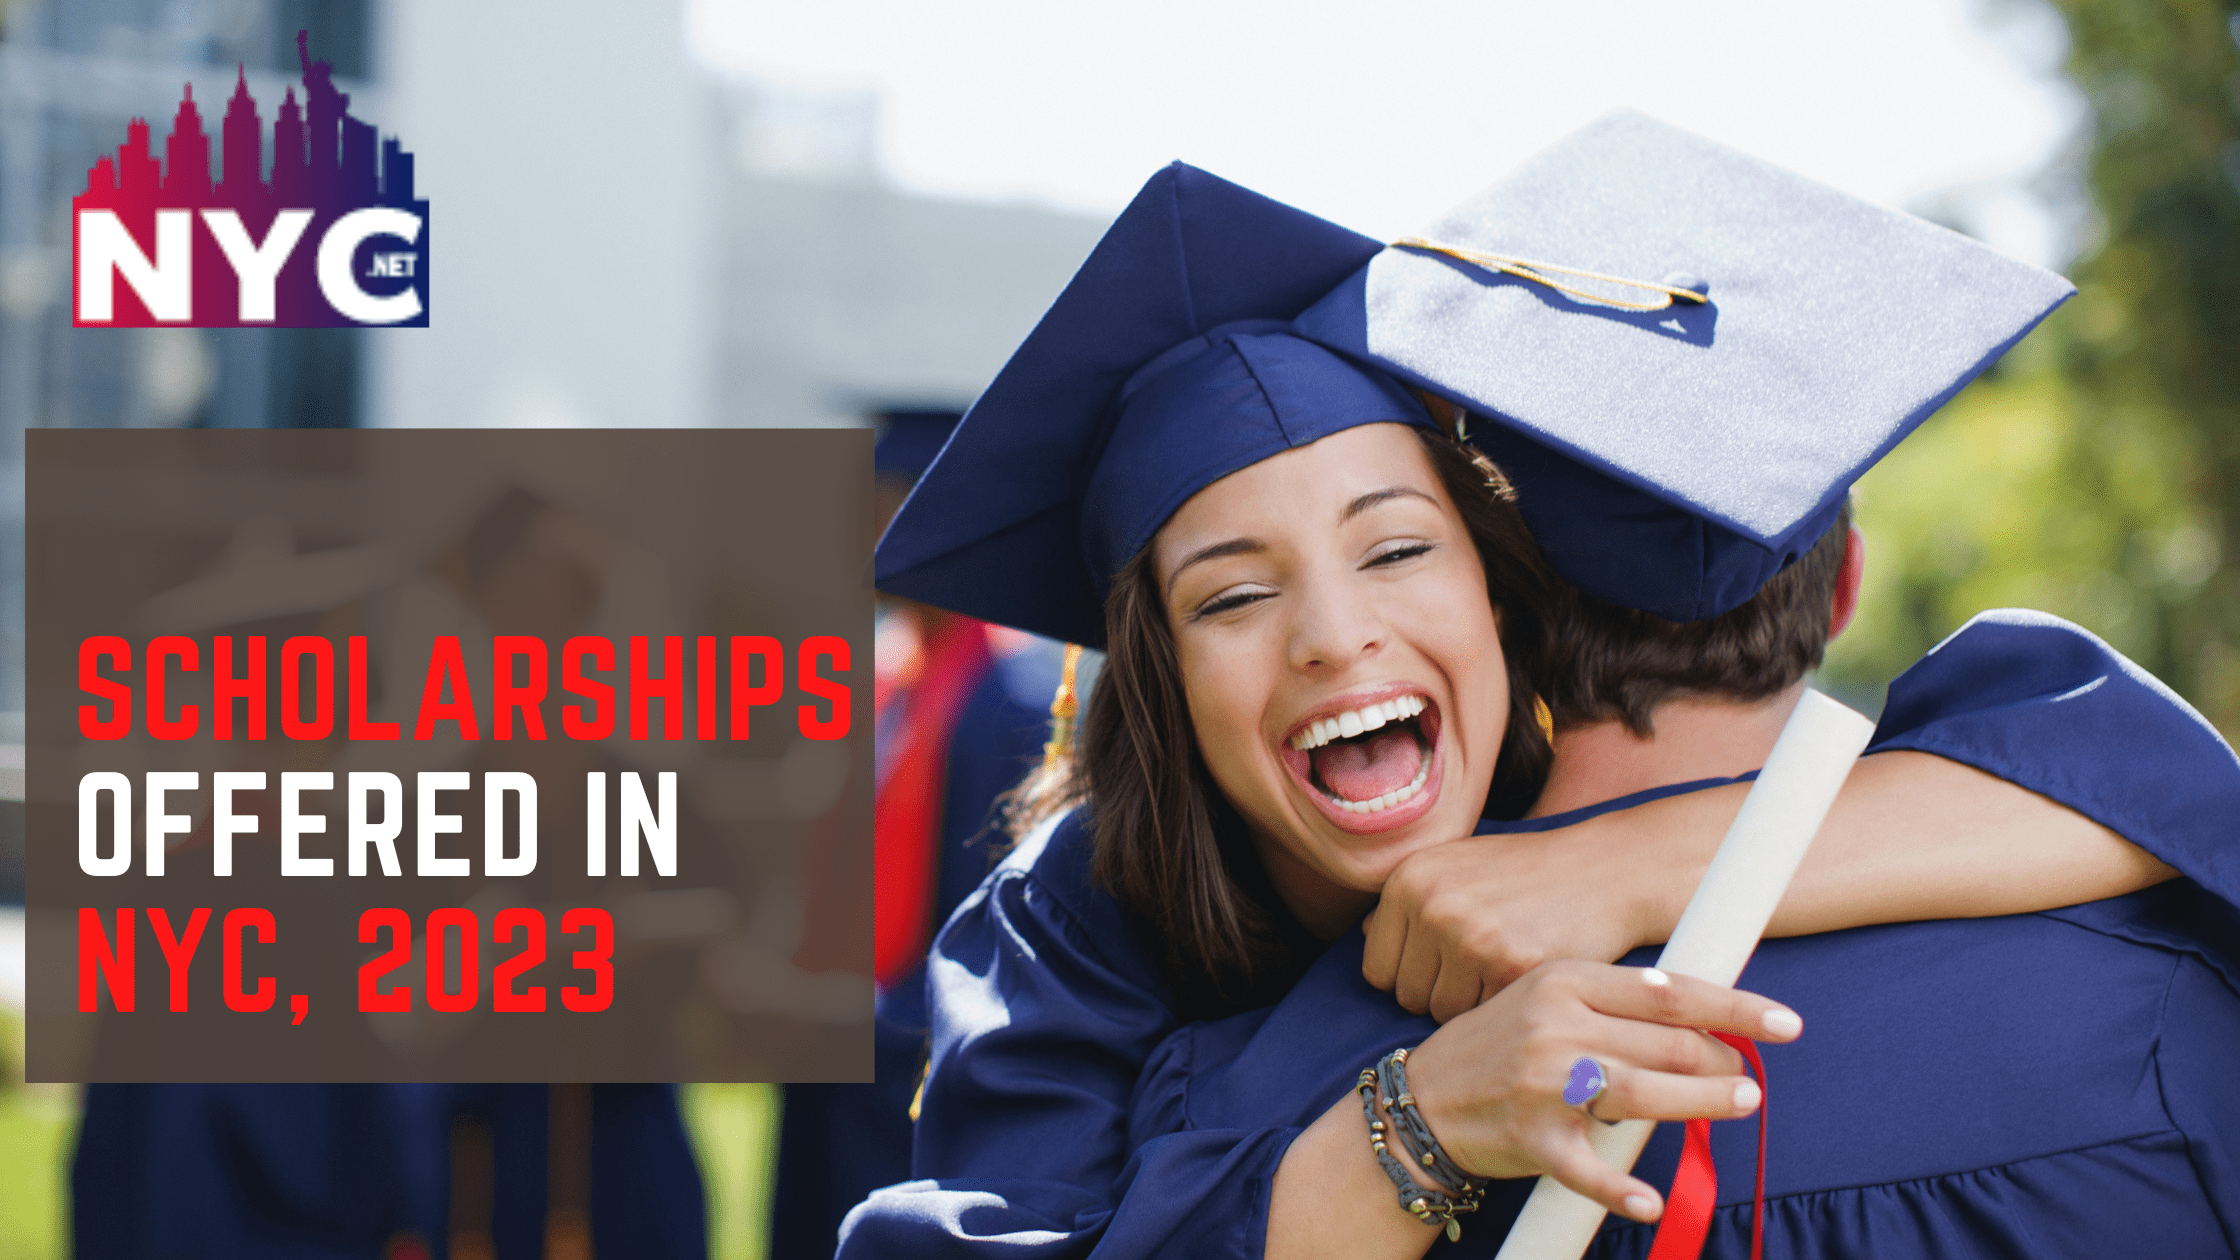 Everything you need to know about Scholarships offered in NYC, 2023